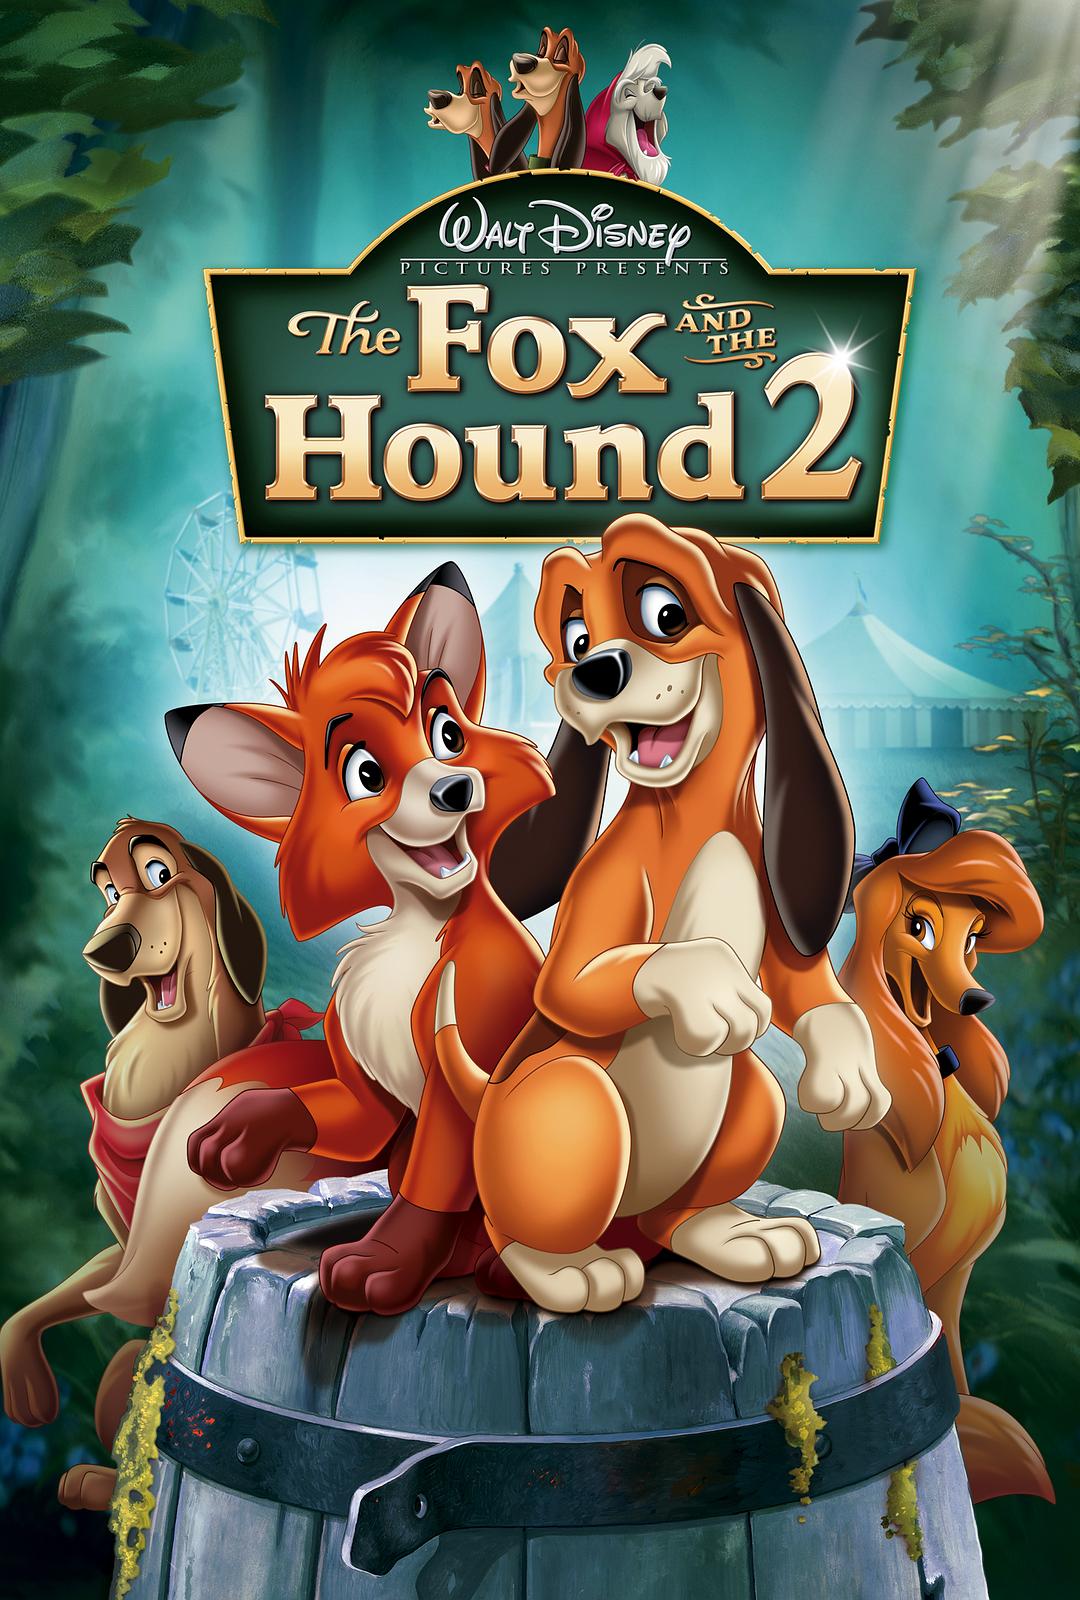 Թ2:Զ/Թ2 The.Fox.And.The.Hound.2.2006.1080p.BluRay.X264-OEM1080 4.36G-1.png